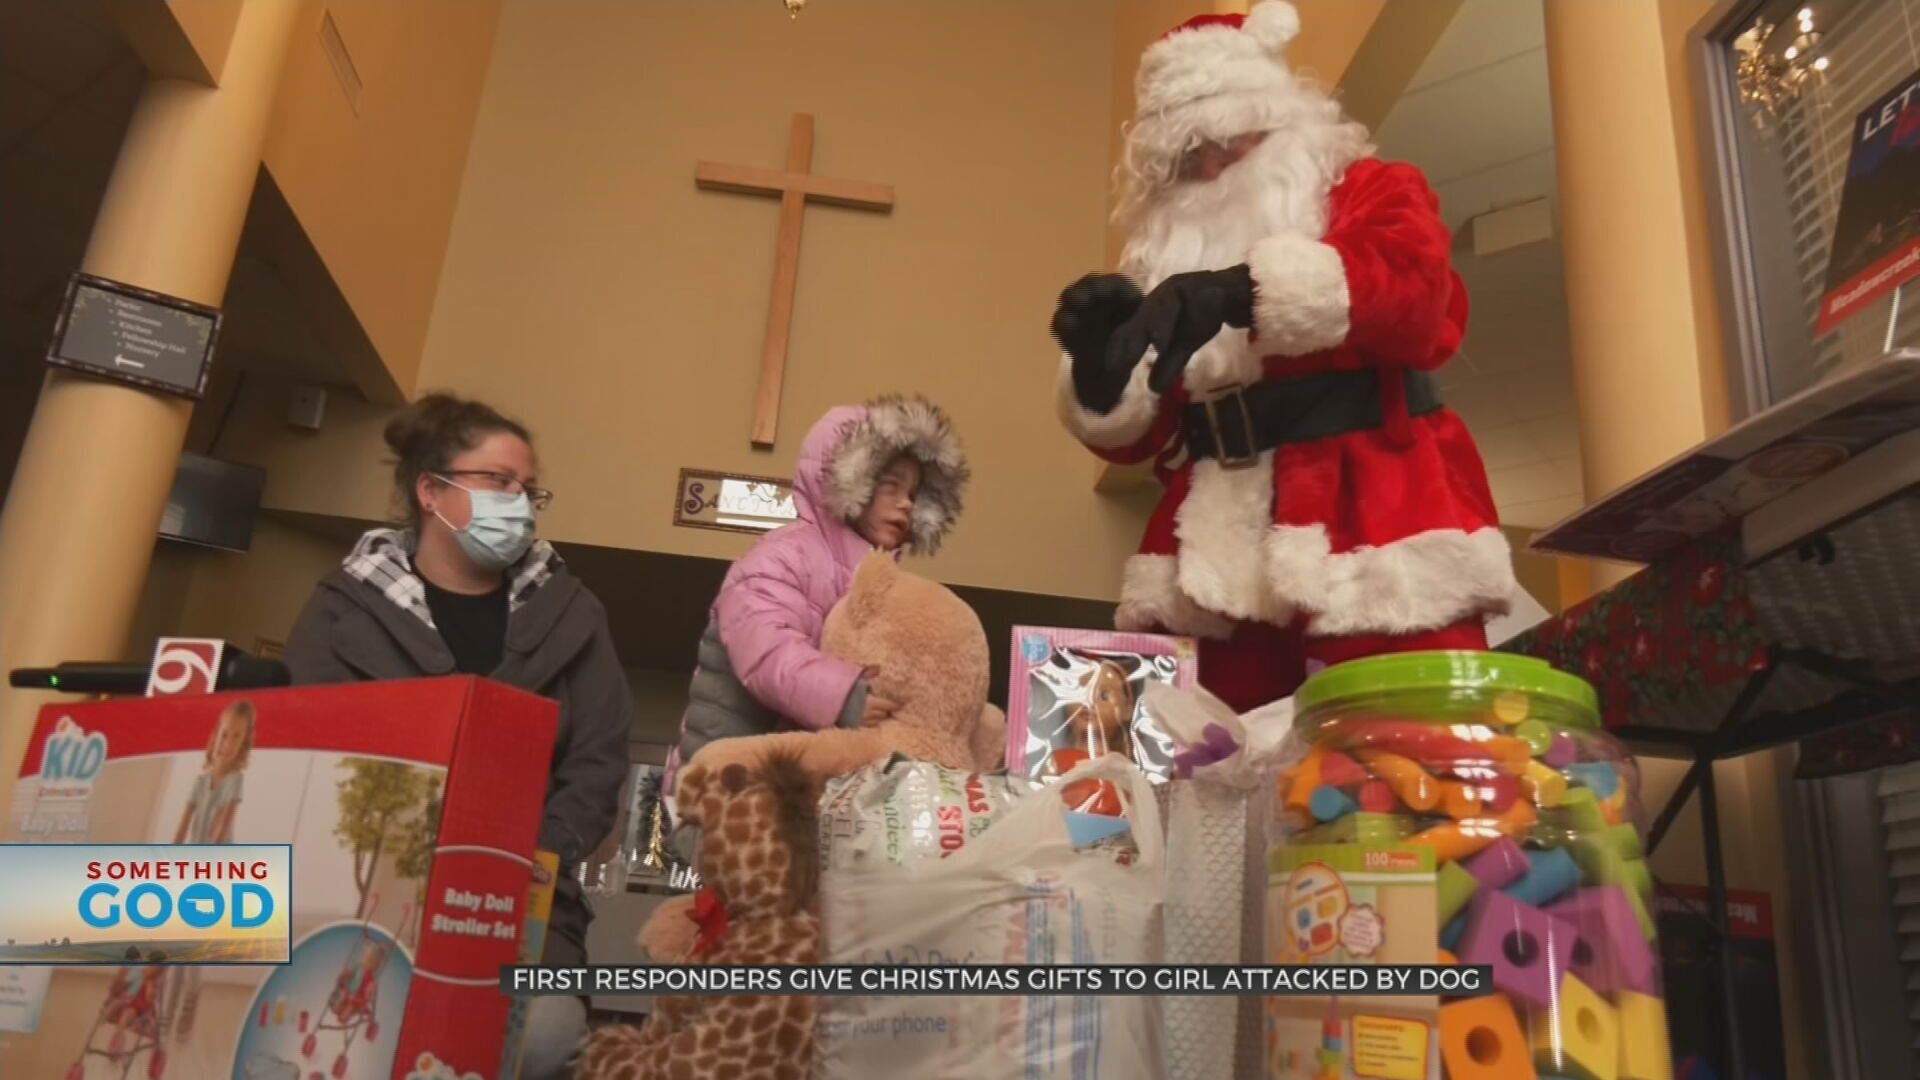 First Responders Surprise 3-Year-Old Attacked By Dog With Christmas Gifts 